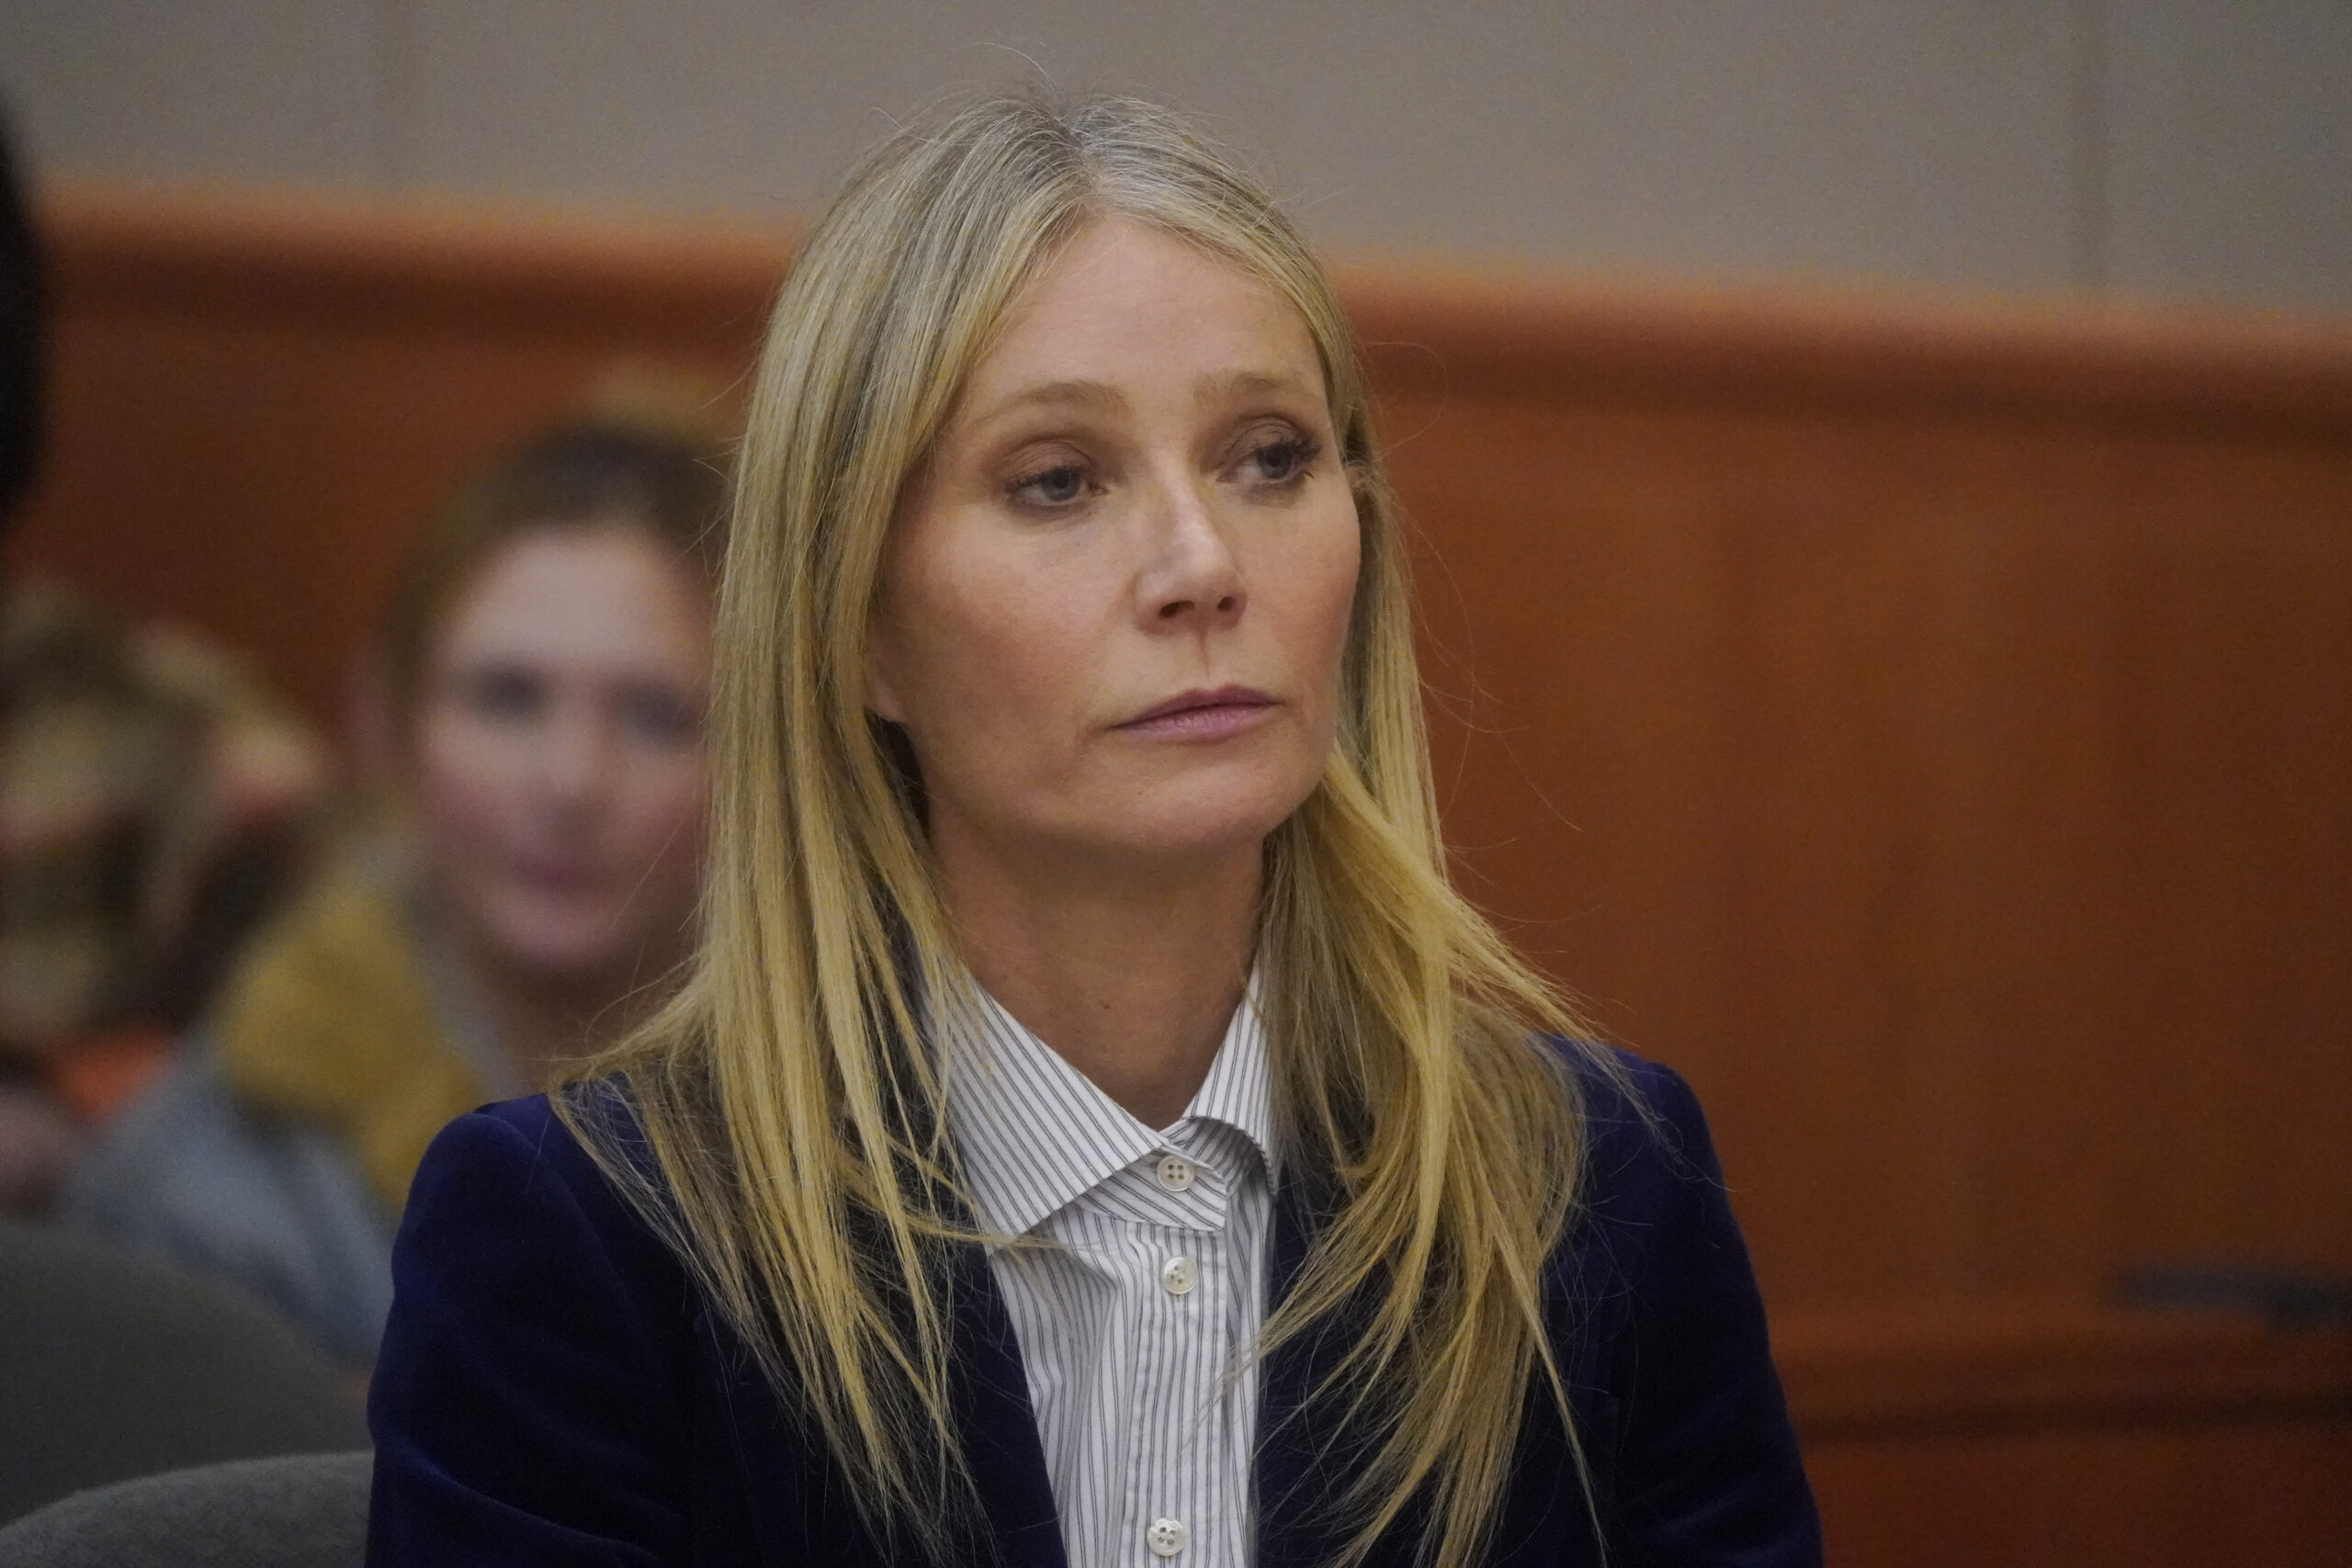 Gwyneth Paltrow sits in court as the verdict is read in her civil trial over a collision with another skier on March 30, 2023, in Park City, Utah. The jury found retired optometrist Terry Sanderson "100 percent" at fault in the mishap that occurred during a run at Deer Valley Resort in Park City, Utah in 2016. Paltrow was awarded the $1 for which she had countersued. Rick Bowmer-Pool/Getty Images/AFP (Photo by POOL / GETTY IMAGES NORTH AMERICA / Getty Images via AFP)